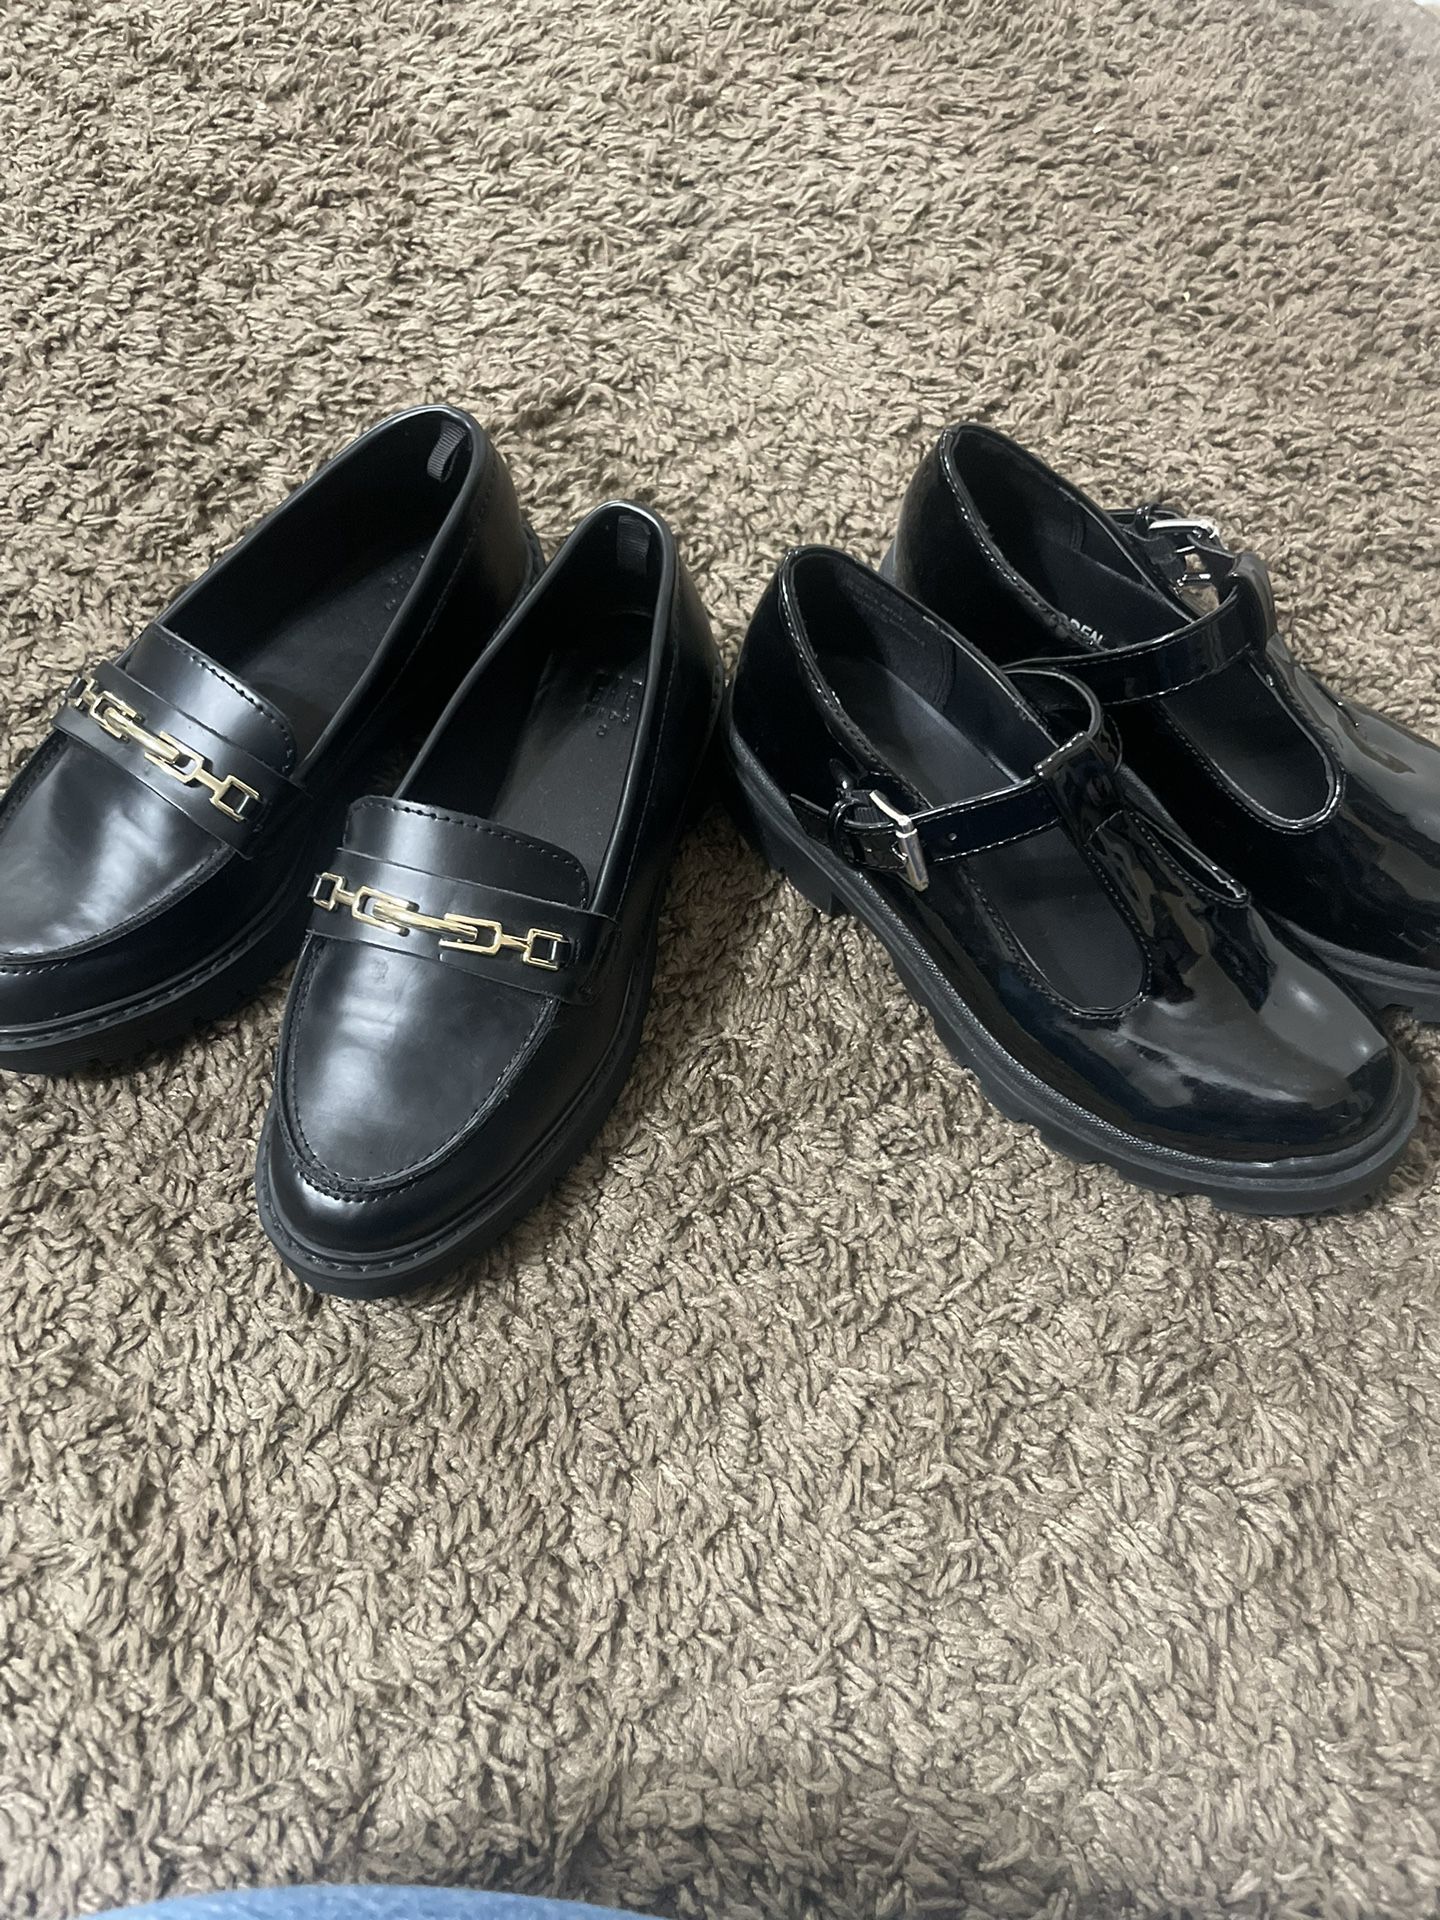 Girls Loafers Size 2